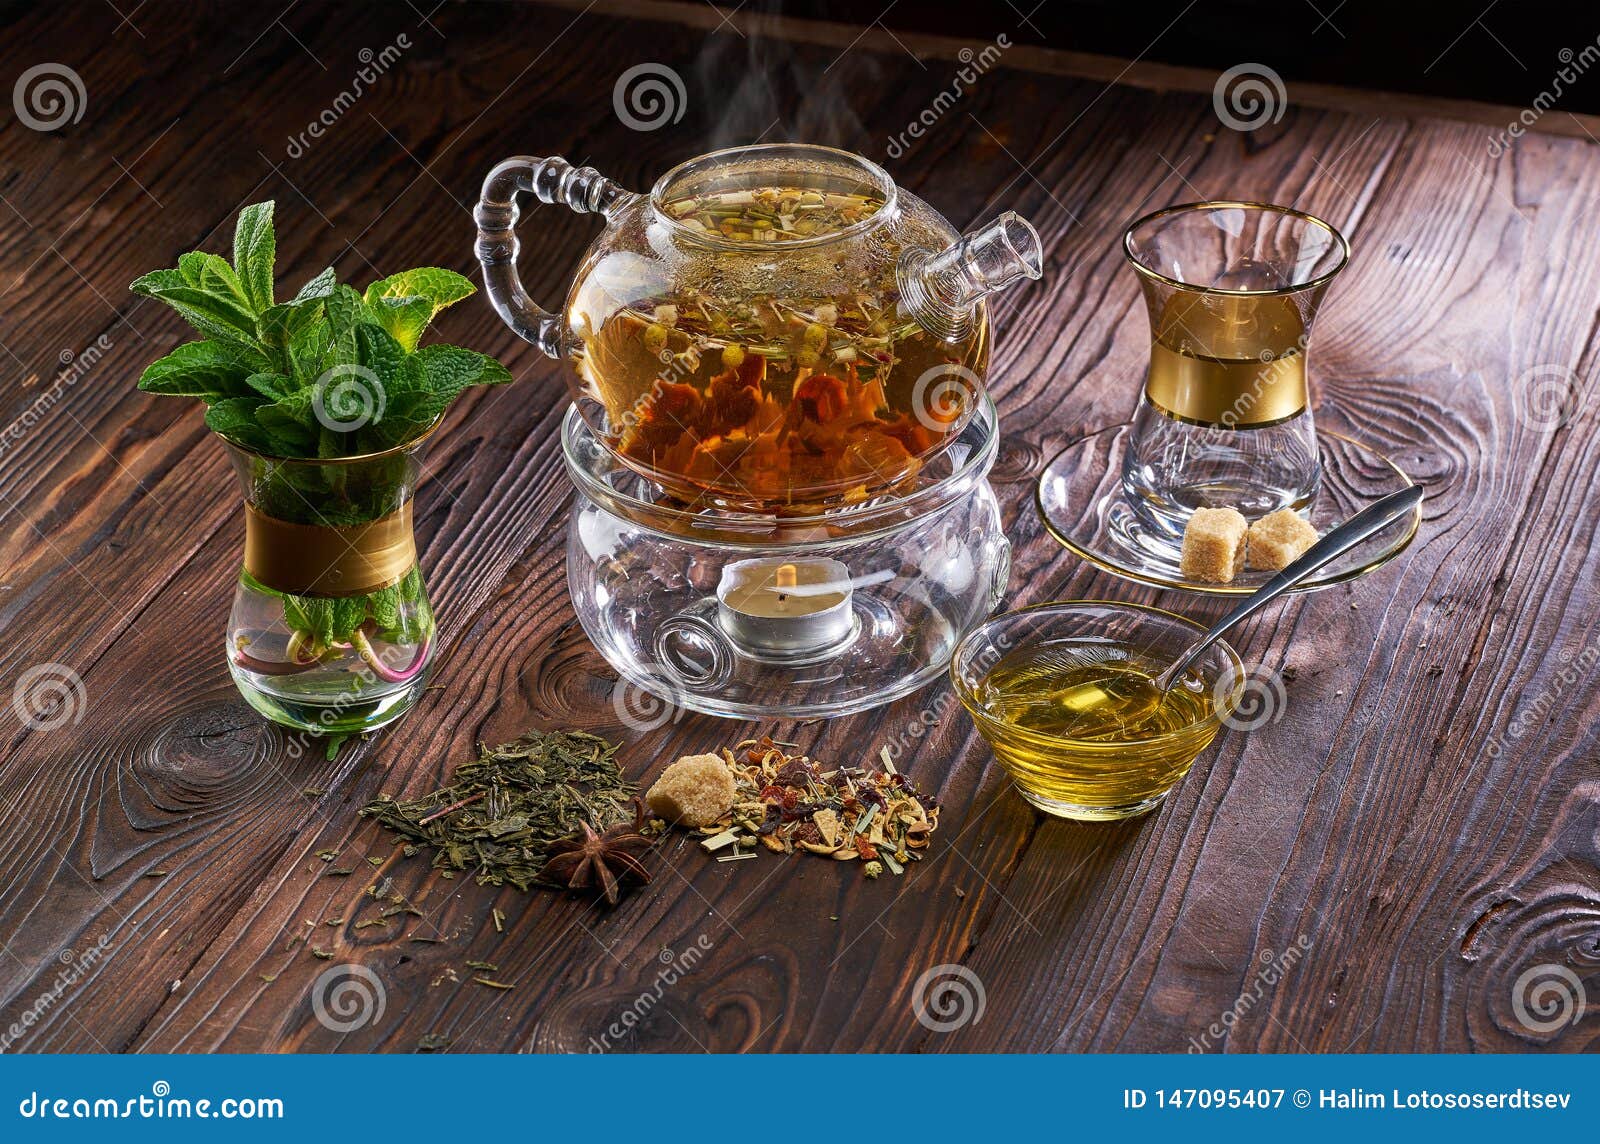 Teapot and Cup of Herbal Tea and Fresh Mint on Wooden Table Stock Image ...